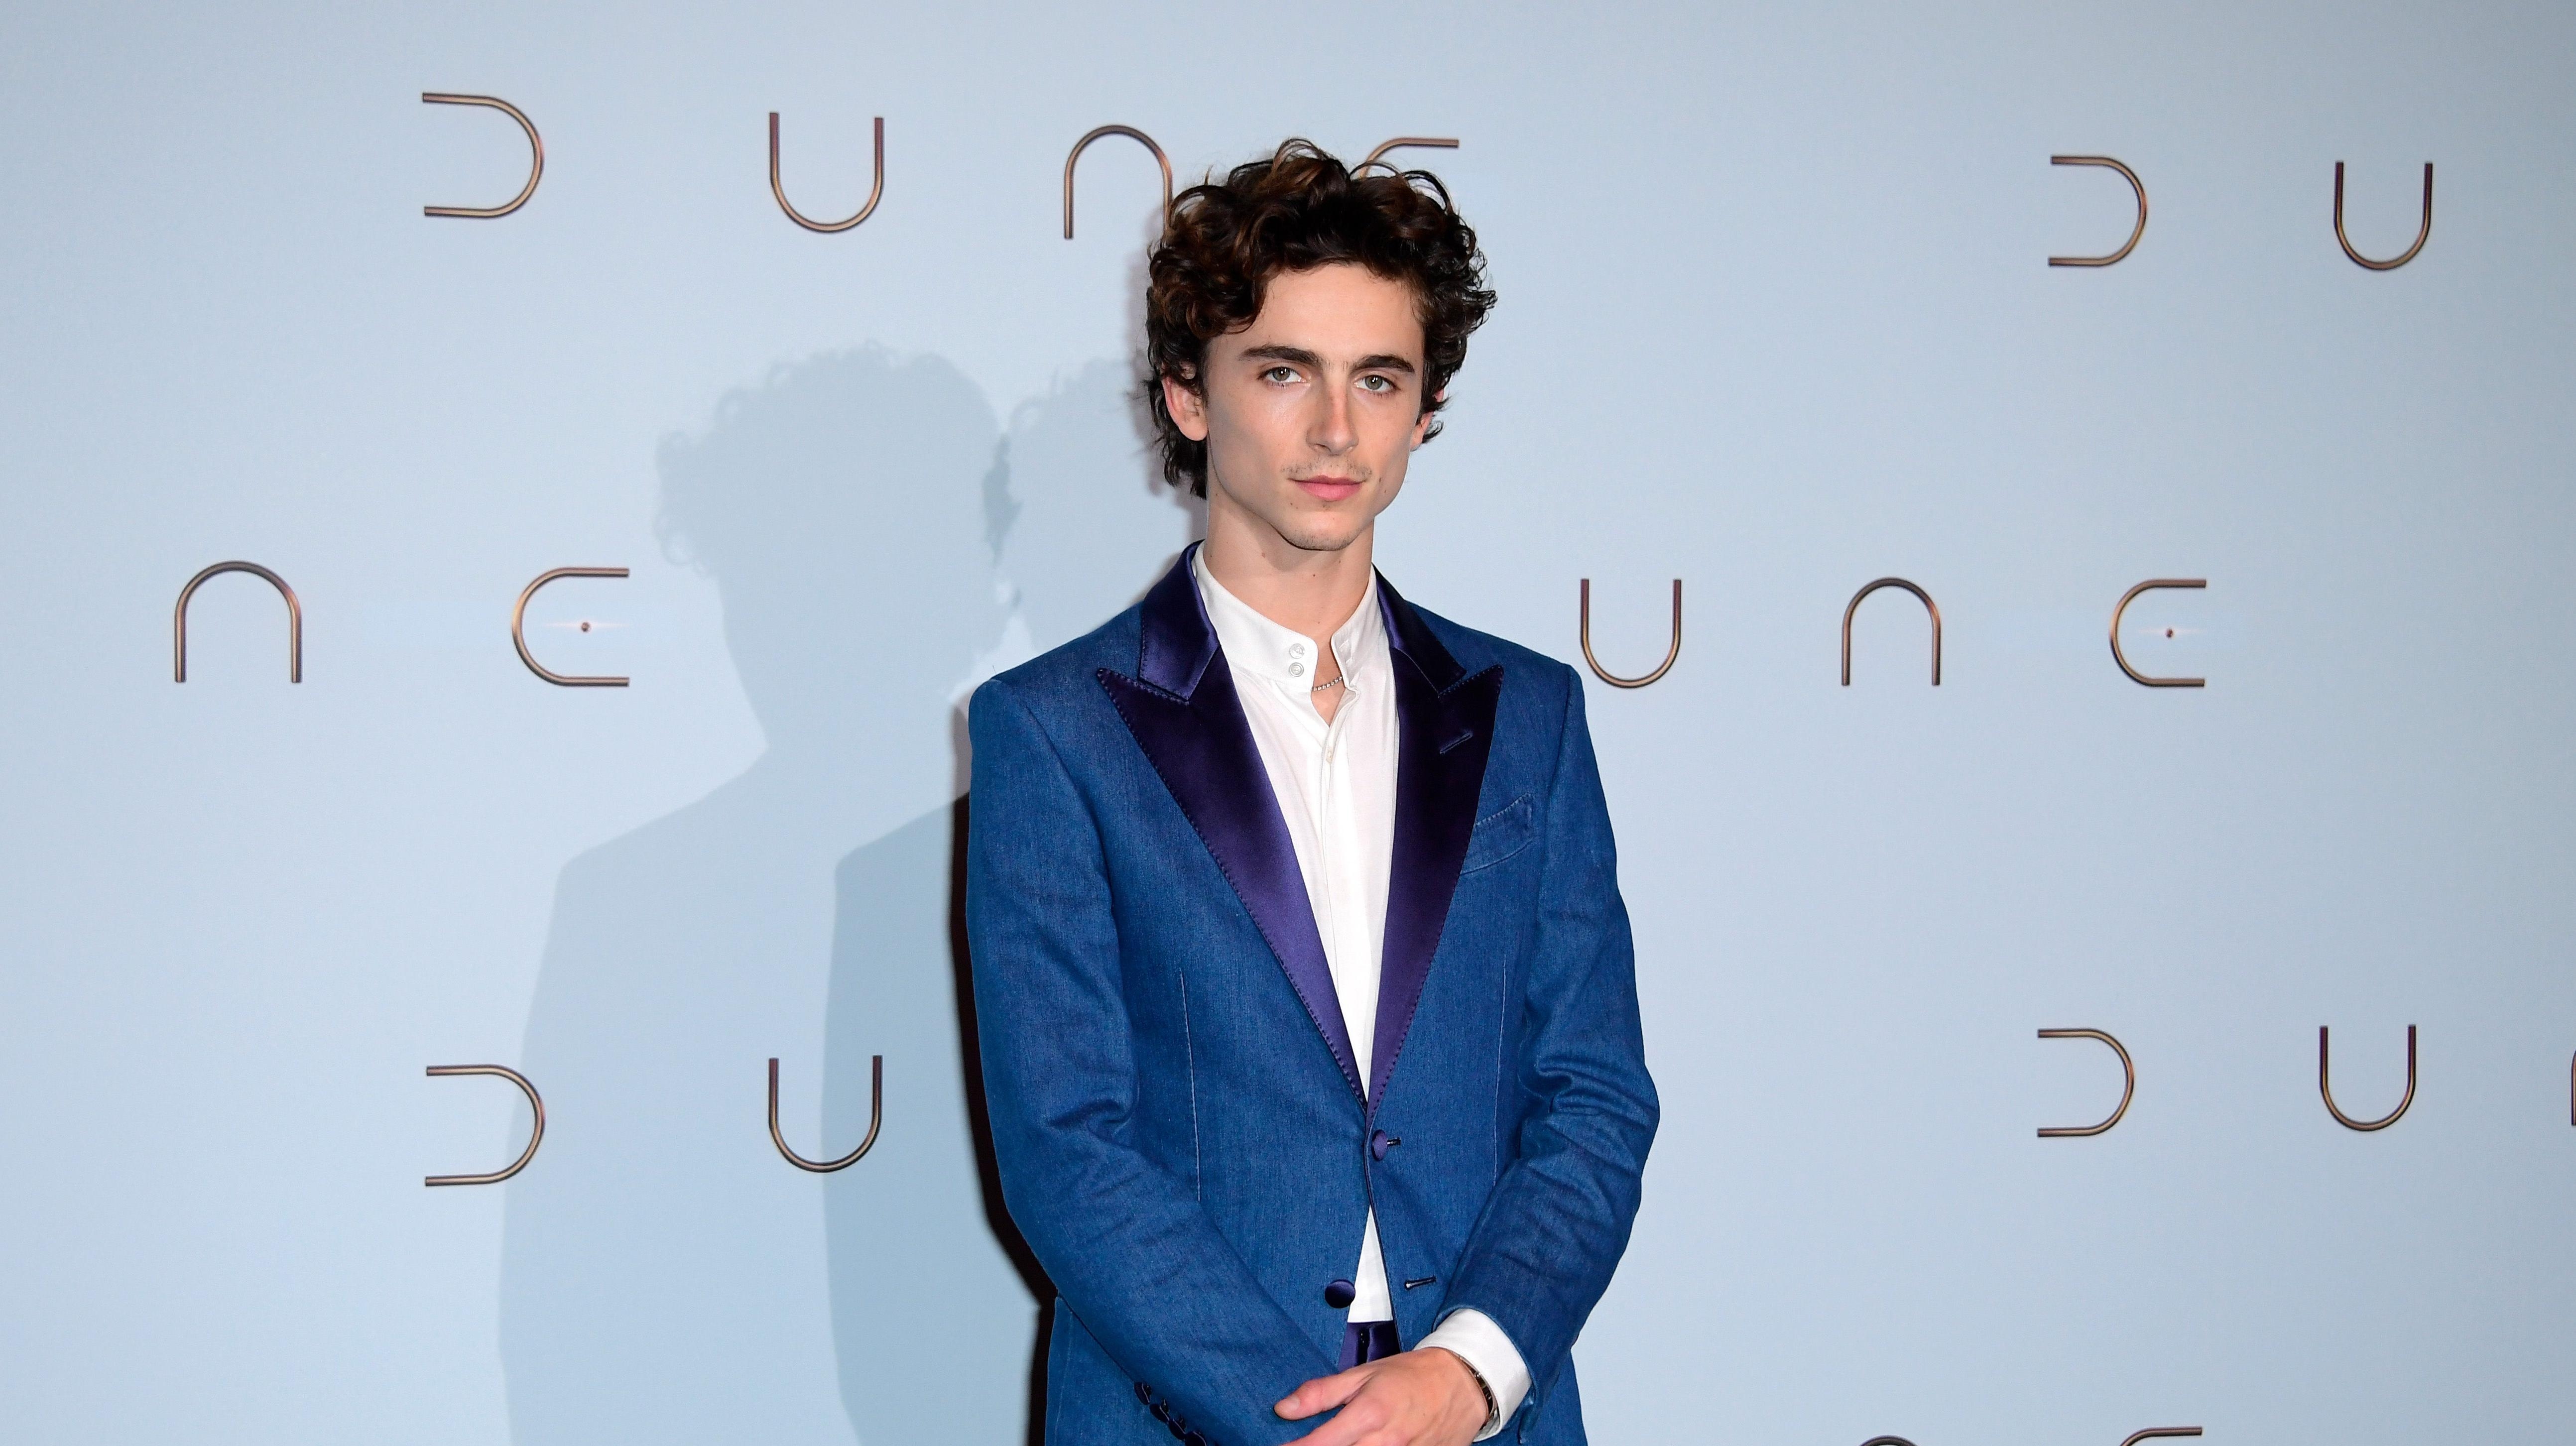 Well, here’s our first look at Timothée Chalamet as Willy Wonka